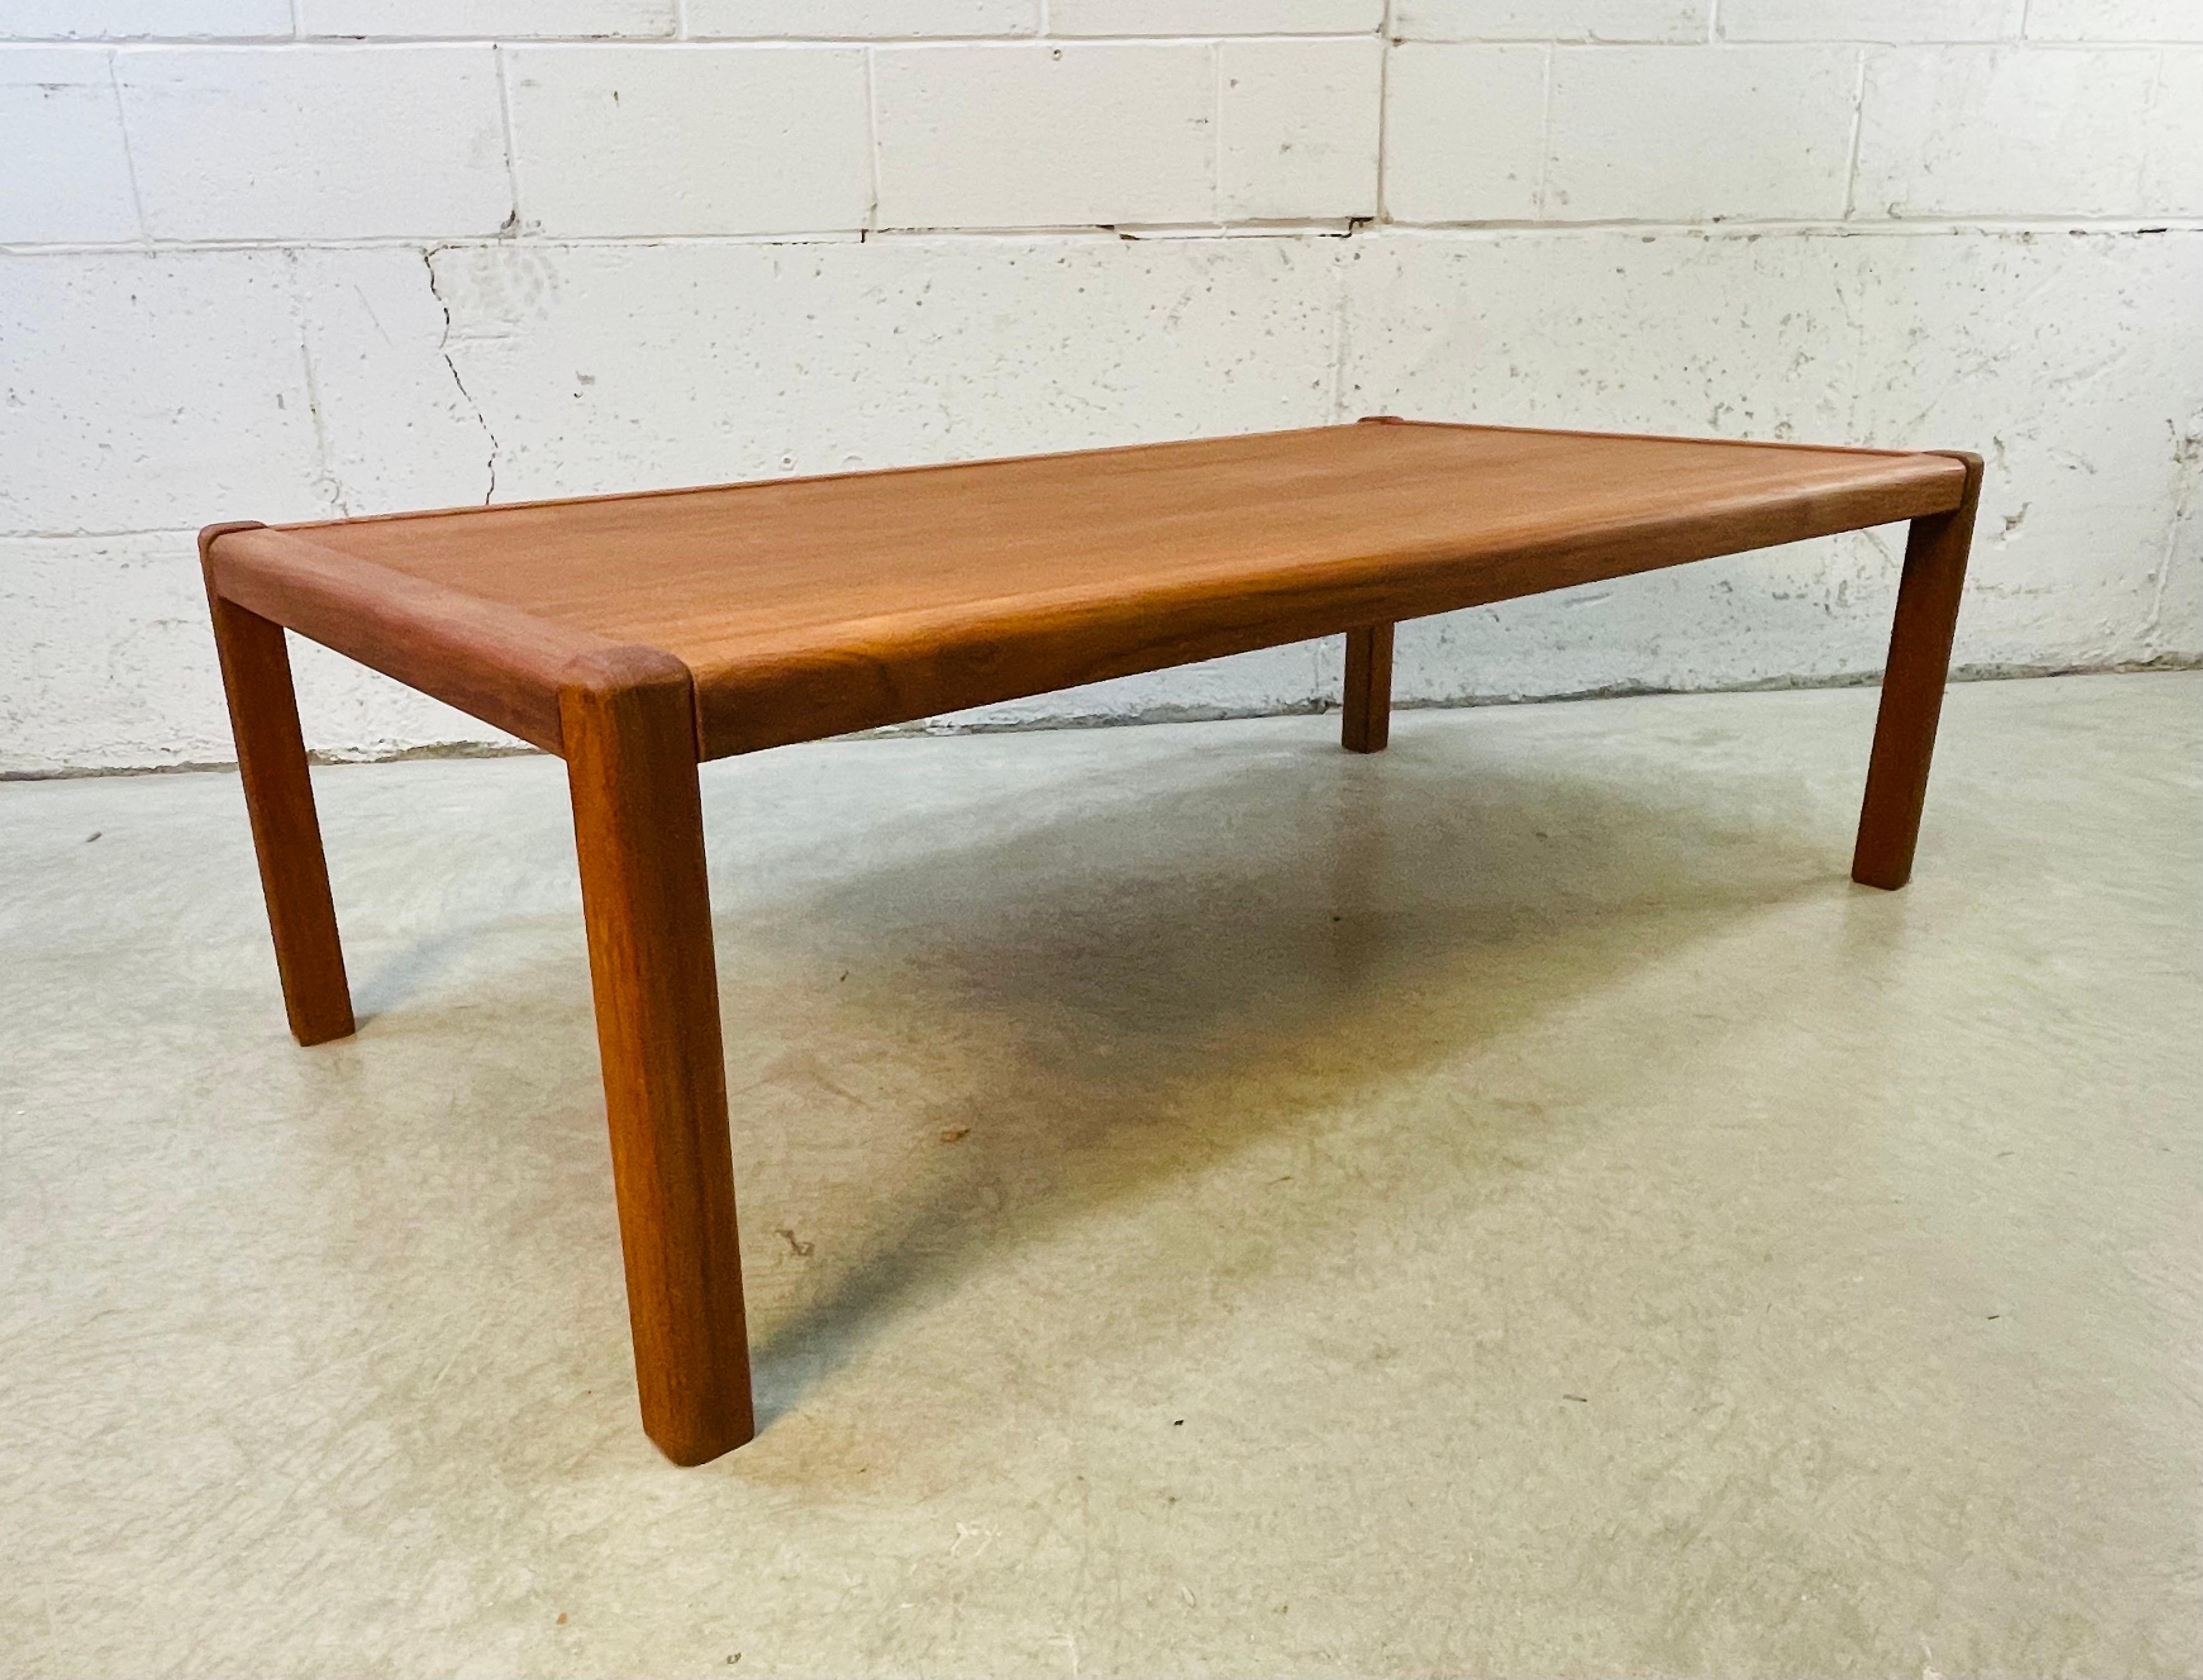 1970s Teak Rectangular Coffee Table In Good Condition For Sale In Amherst, NH